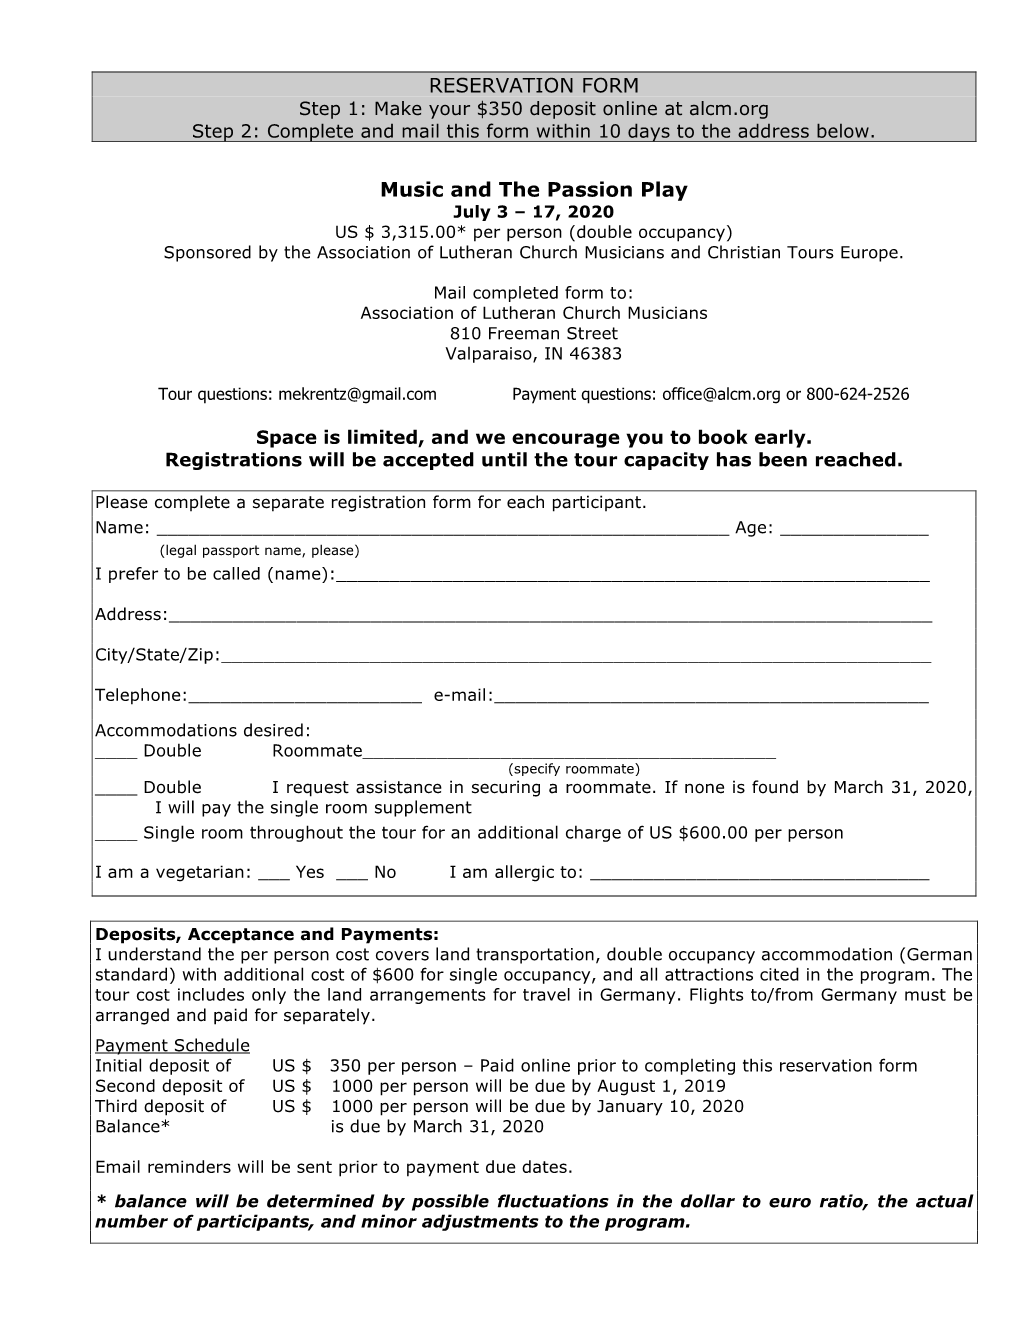 RESERVATION FORM Music and the Passion Play